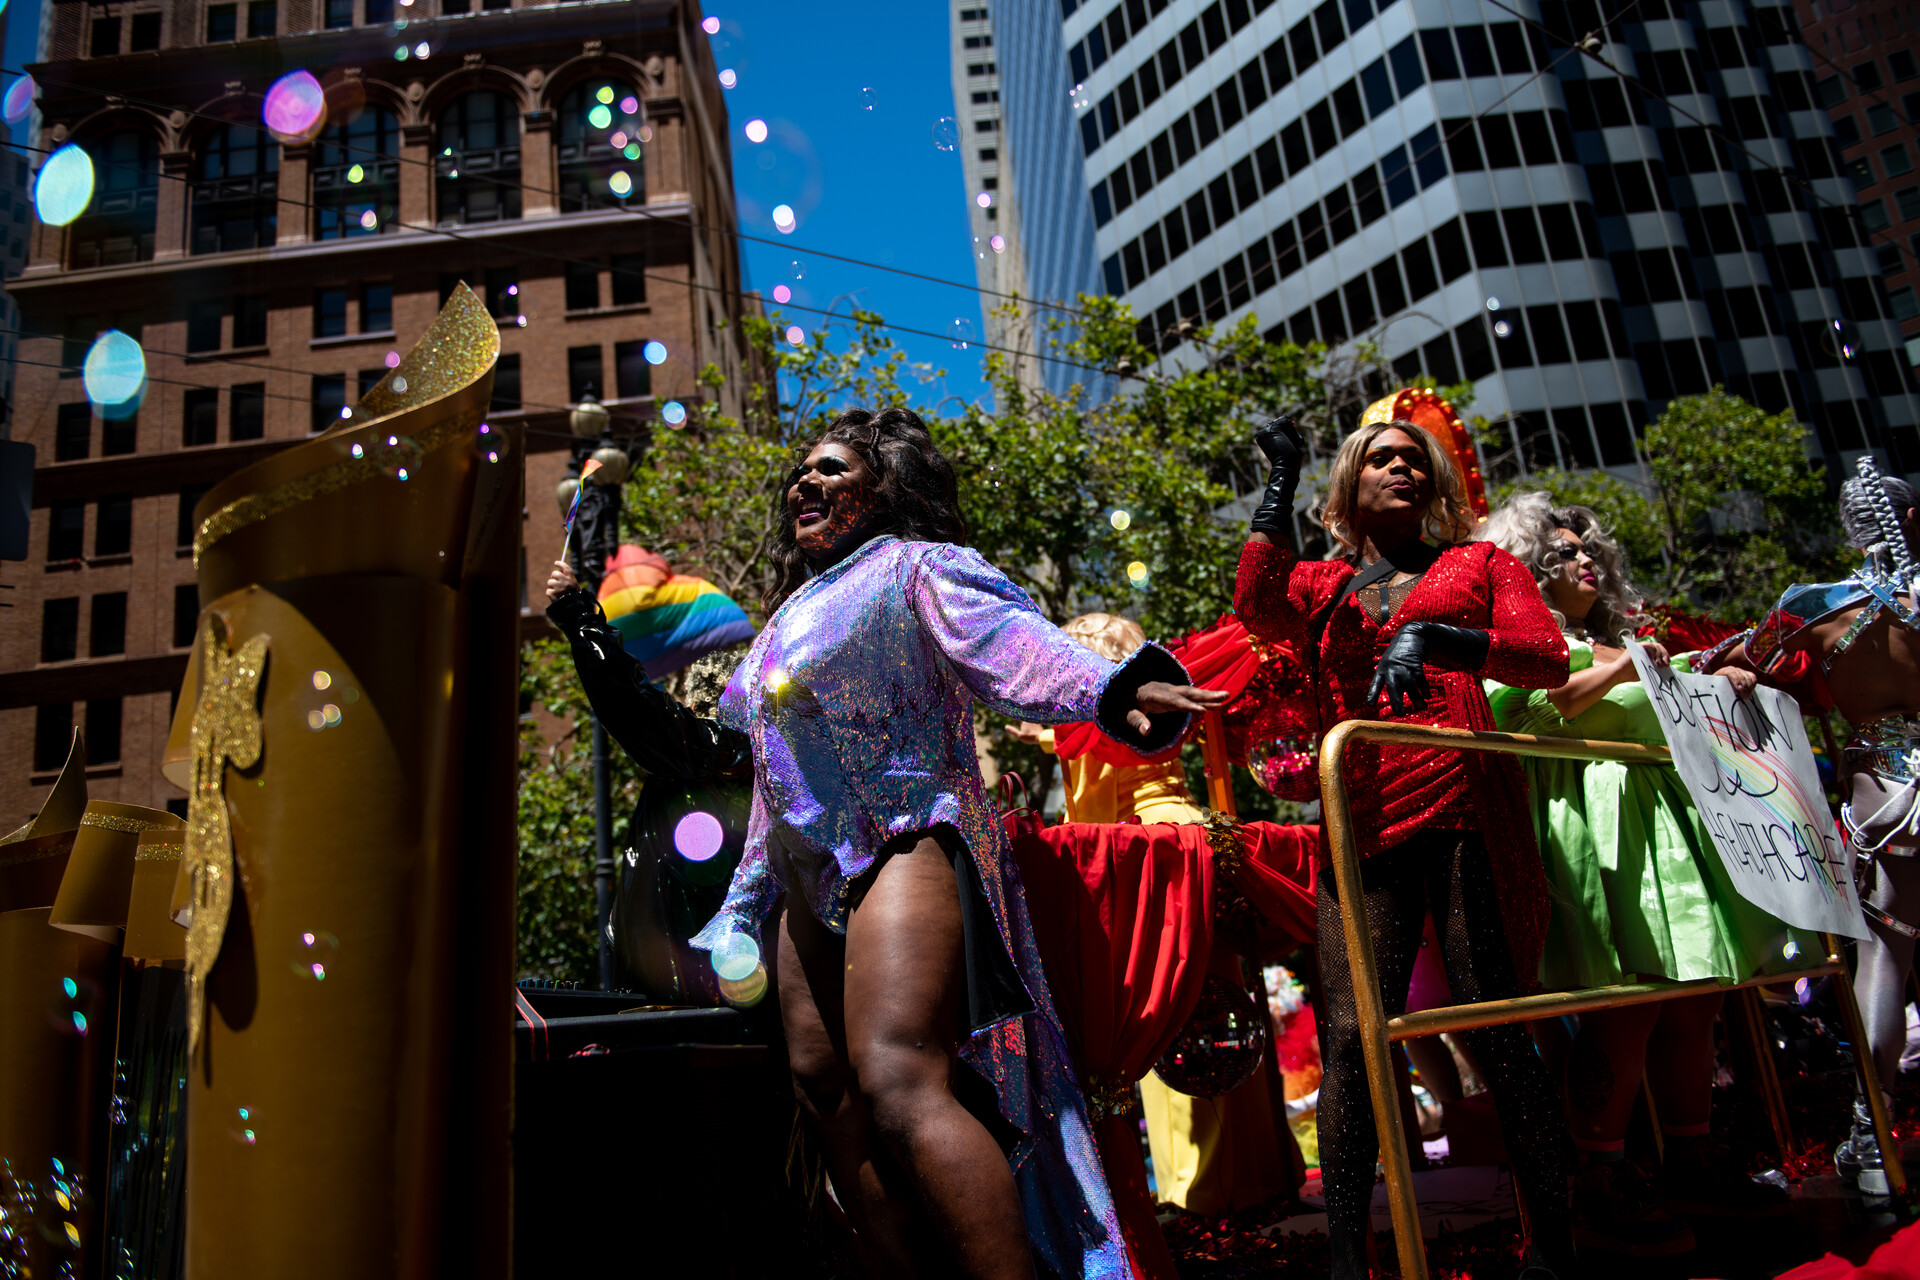 Drag queens dance on a float at San Francisco Pride with tall building and a bright blue sky behind them. At the front is Nicki Jizz, a Black drag queen wearing a short iridescent purple dress.